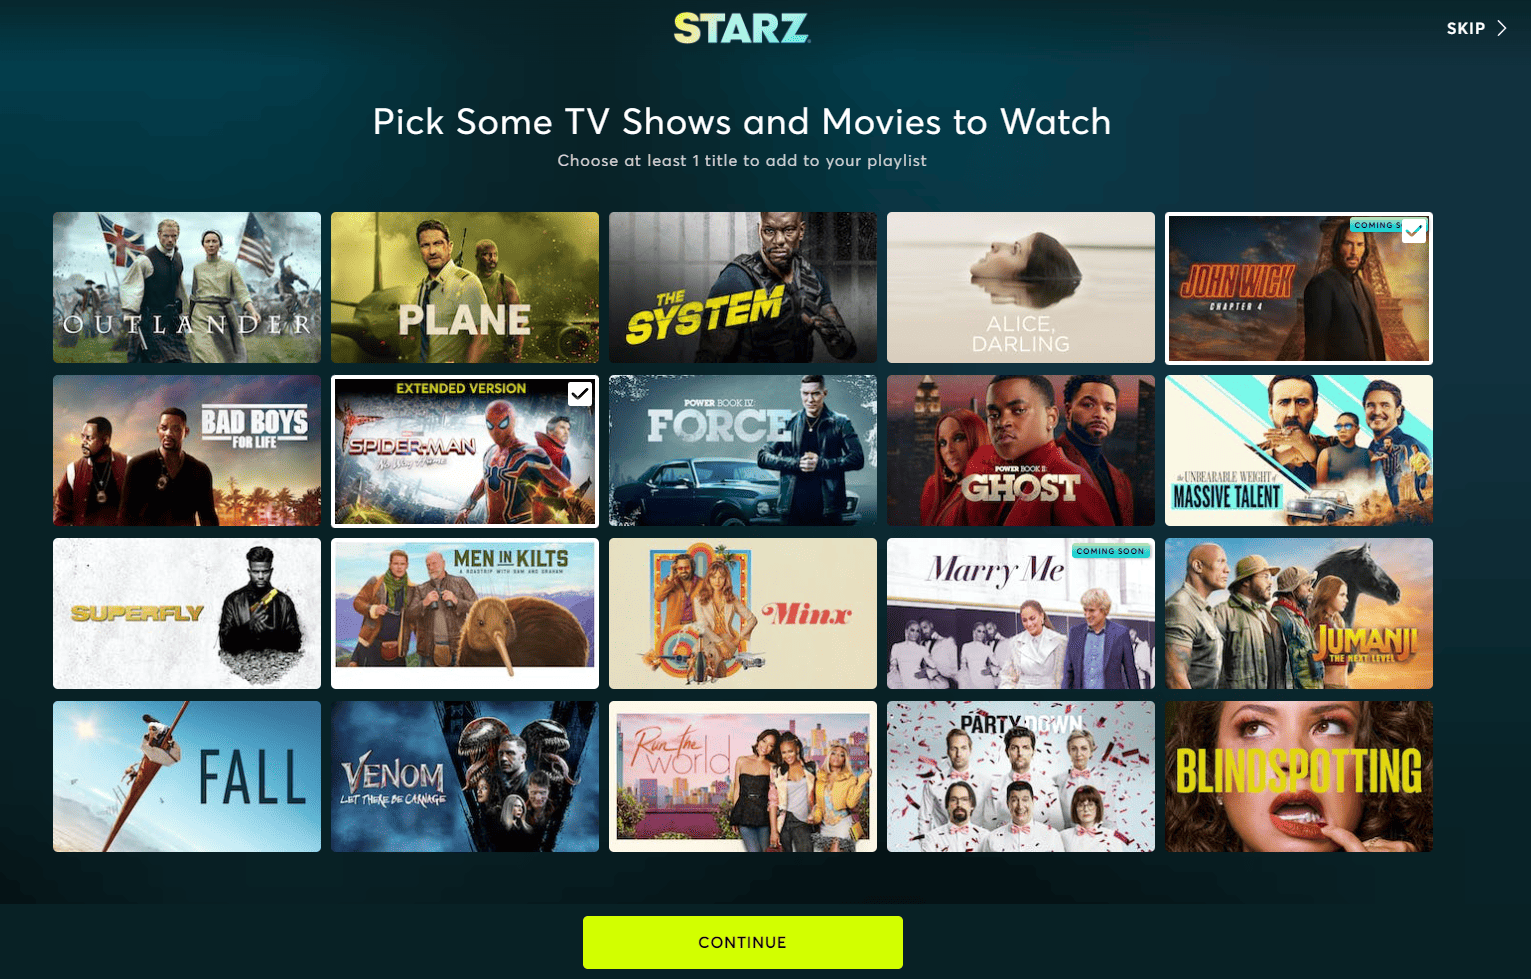 A screenshot of a selection of TV shows and movies to add to a playlist on STARZ